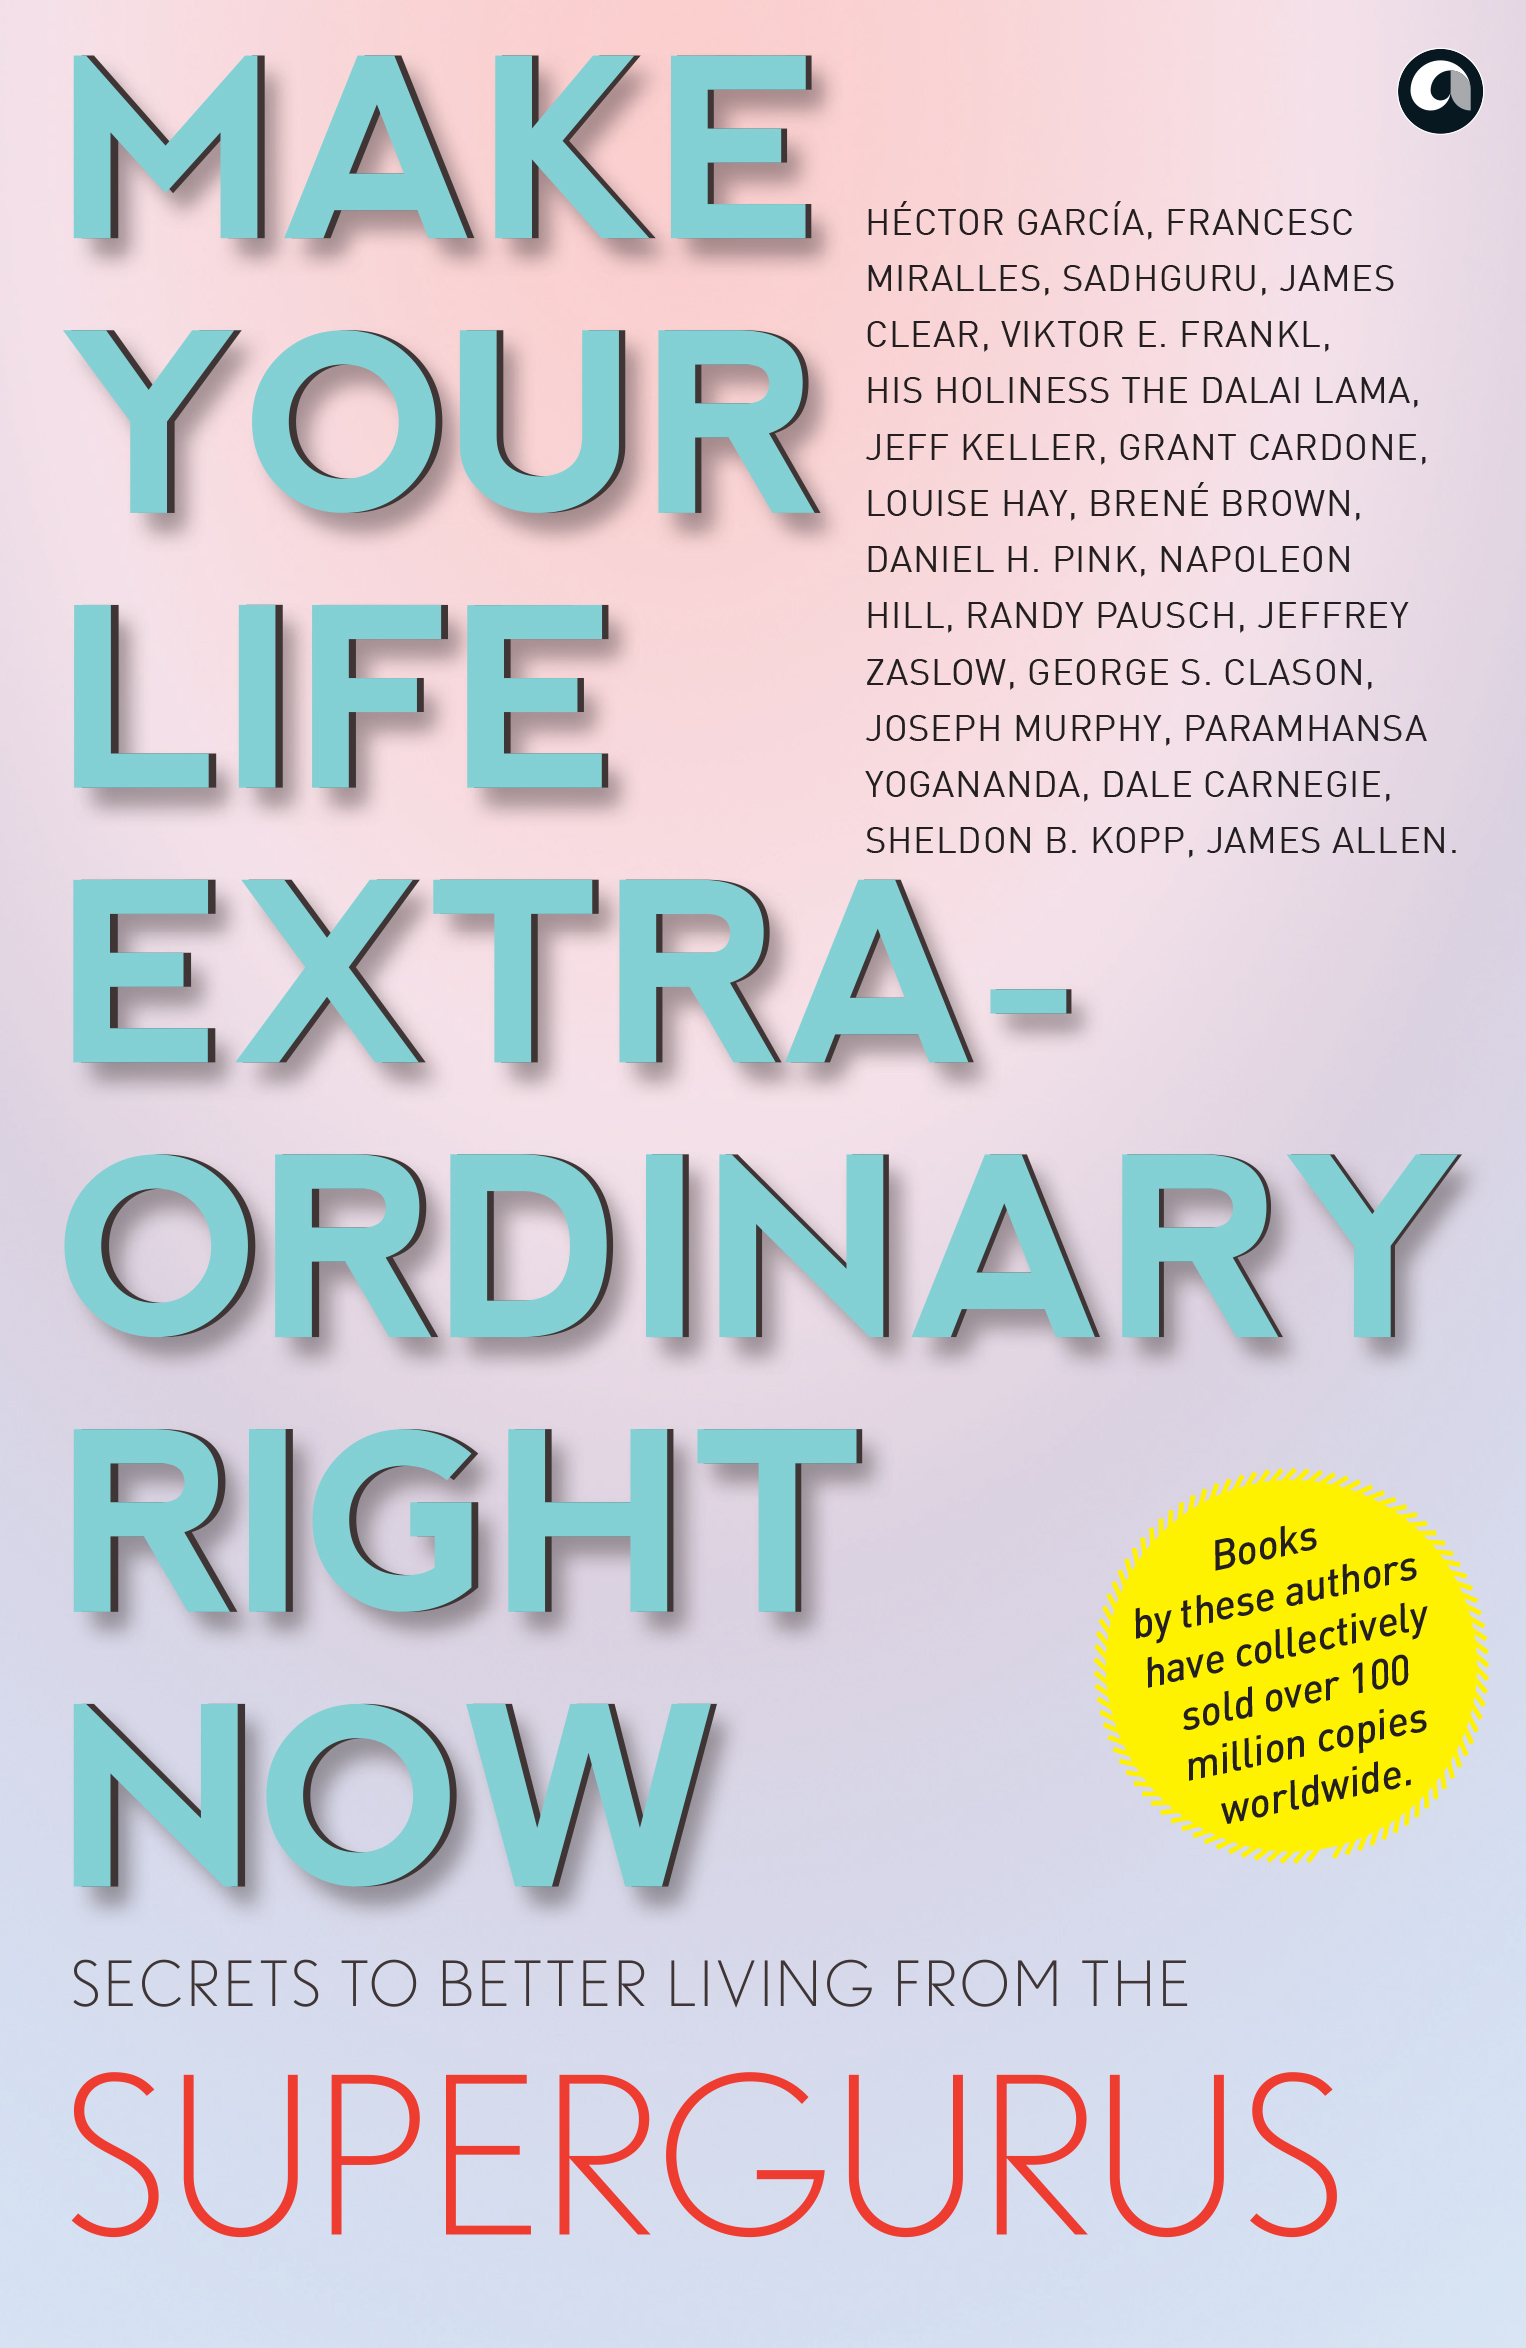 Make Your Life Extraordinary Right Now: Secrets to Better Living from the Supergurus